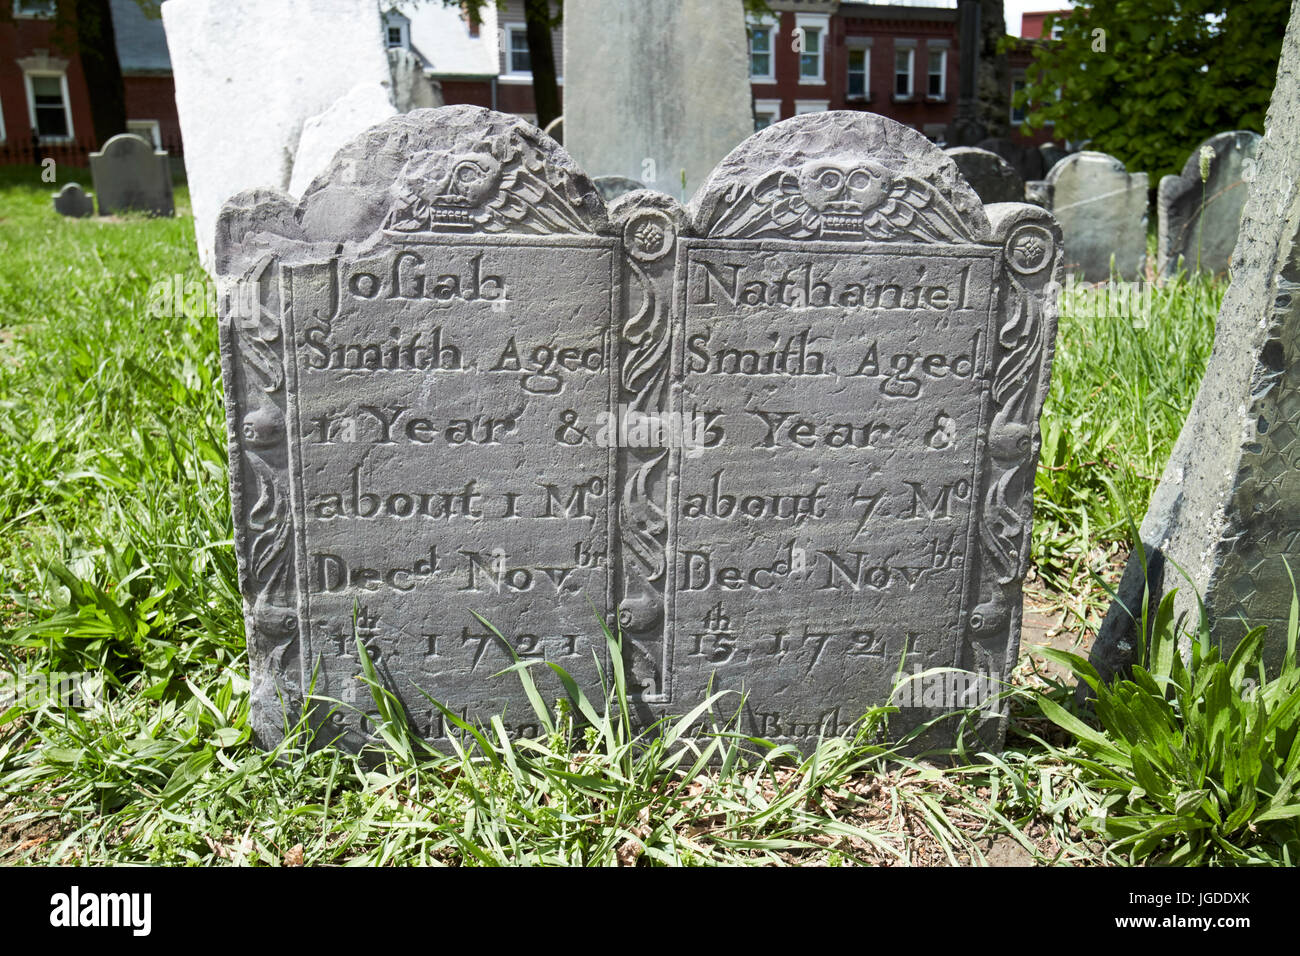 double grave gravestones for two young children josiah and nathaniel smith who died in 1721 in copps hill burying ground Boston USA Stock Photo